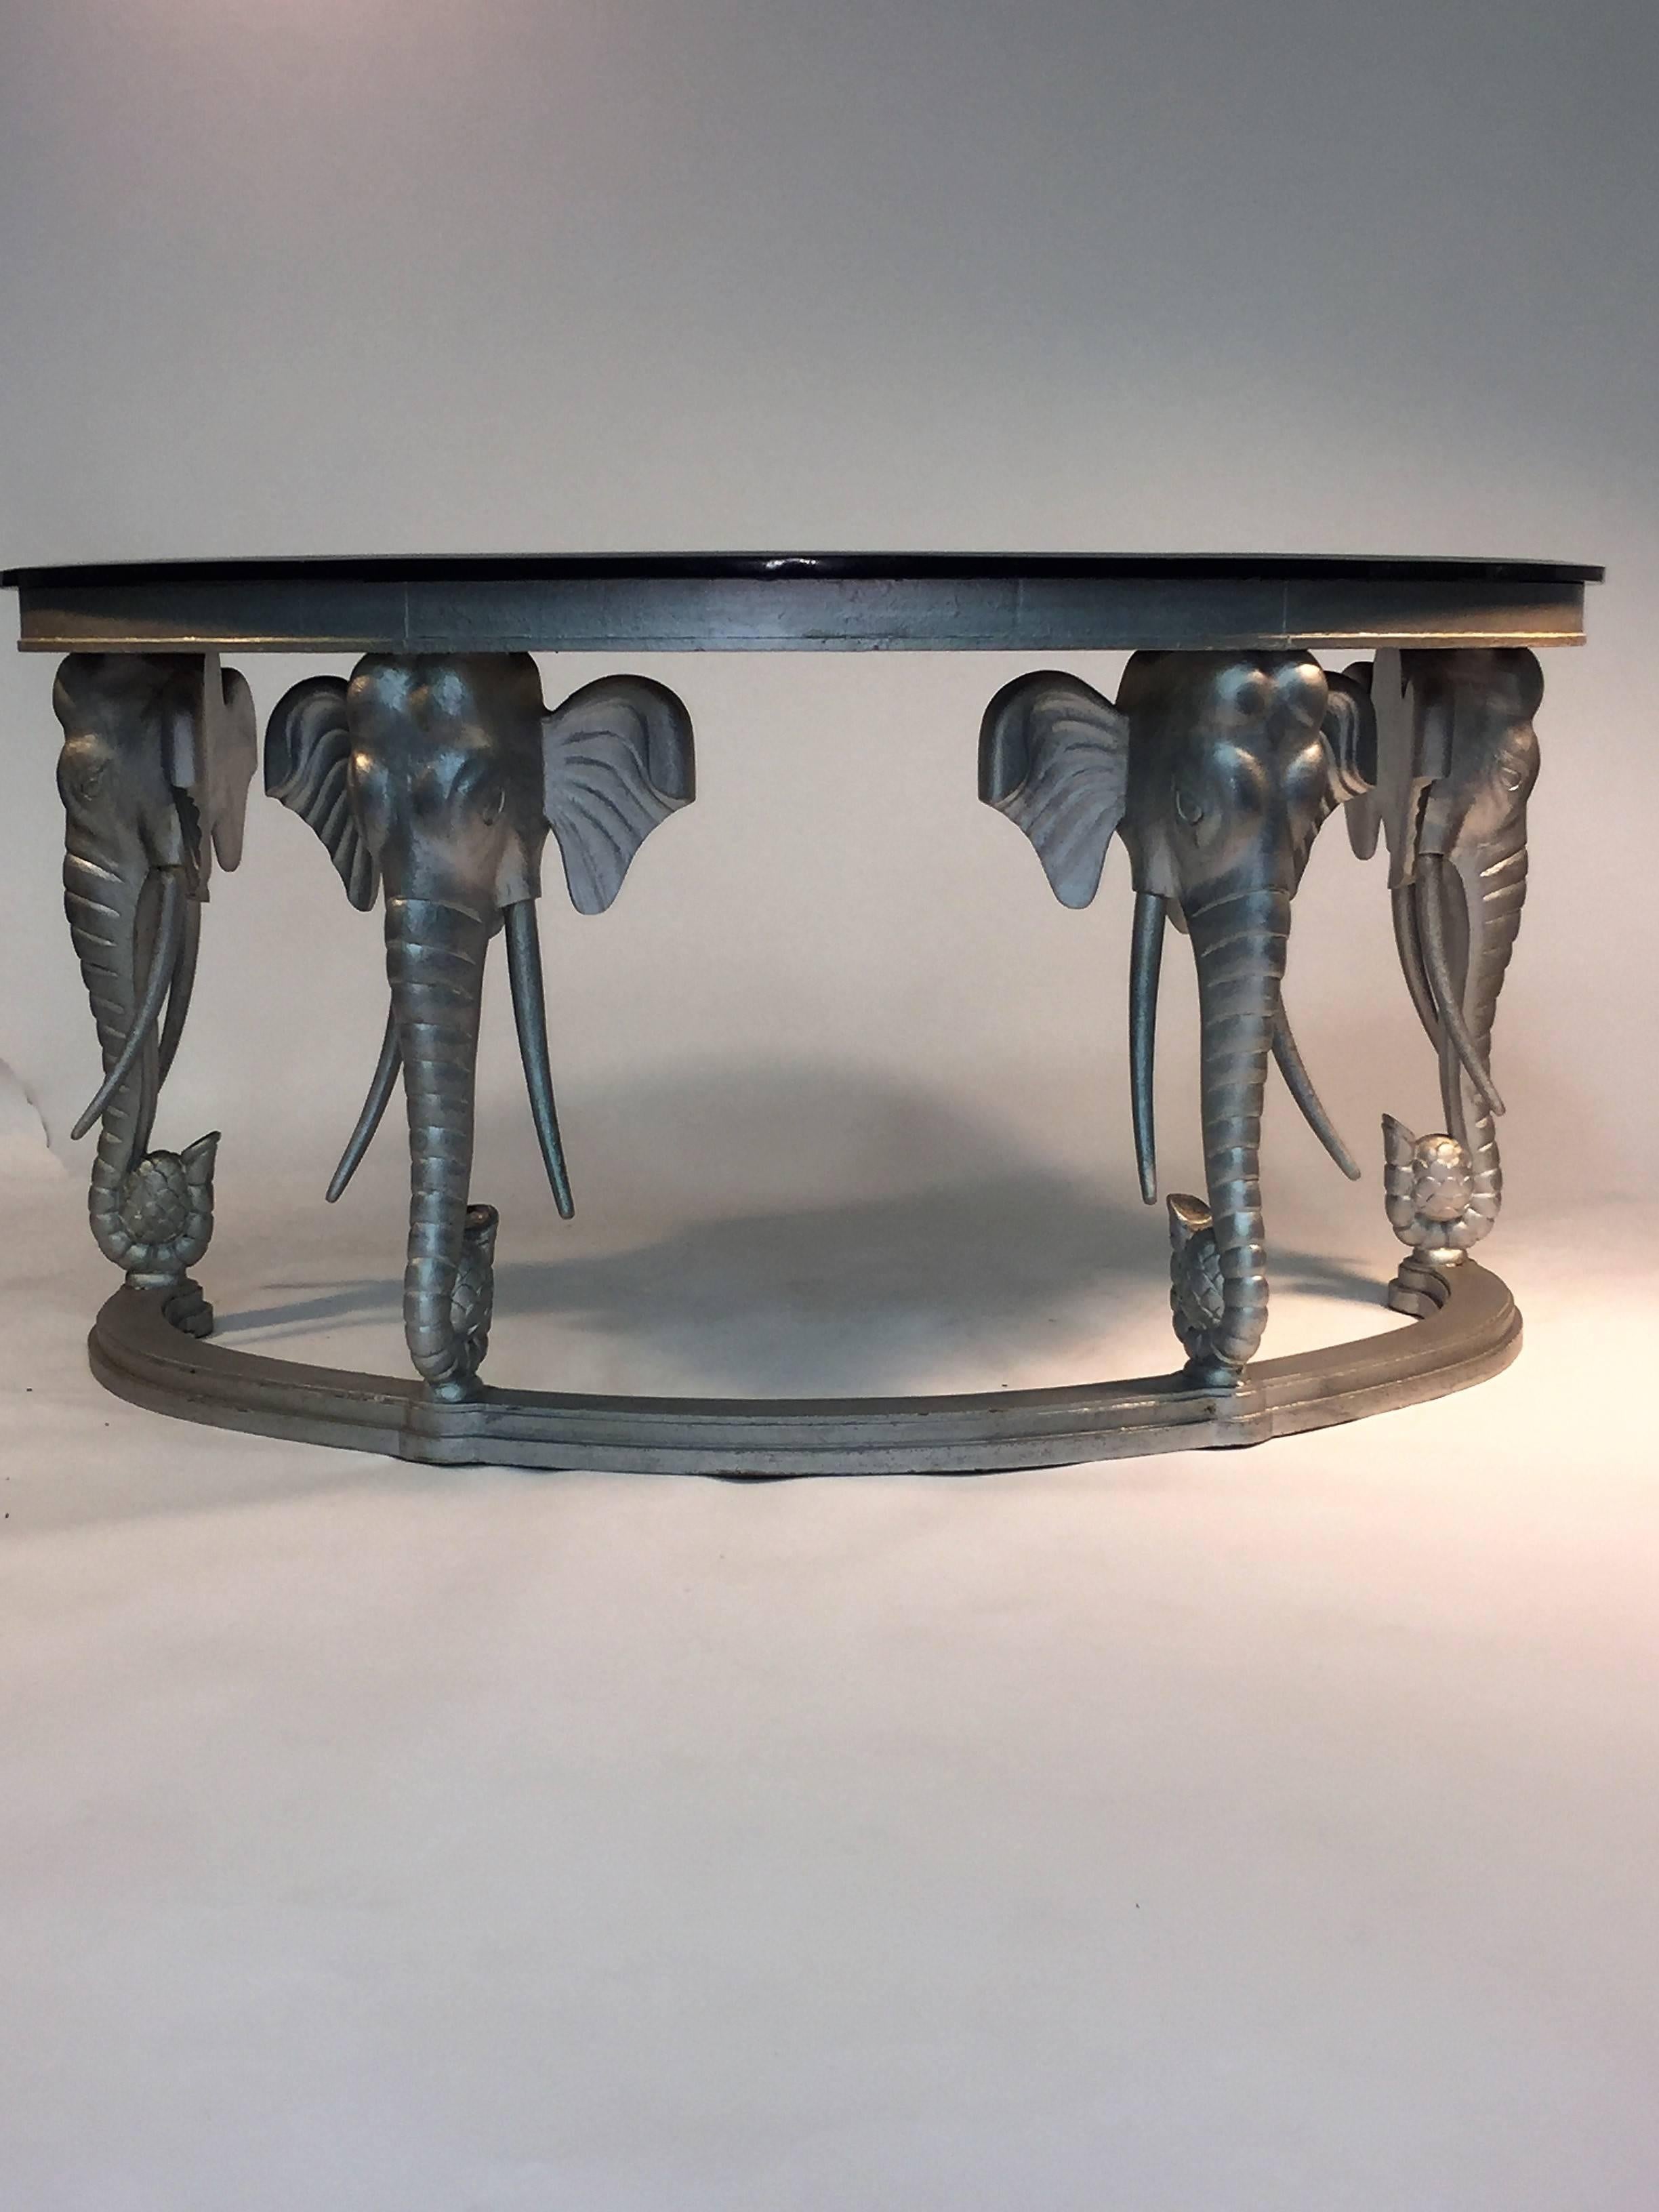 Beautiful hand-carved wood console table or desk designed in the 1970s depicting four full elephant heads with beautiful tusks holding a pineapple in their trunks. Perfect for an entry way with a glamorous mirror above it or as a desk for your